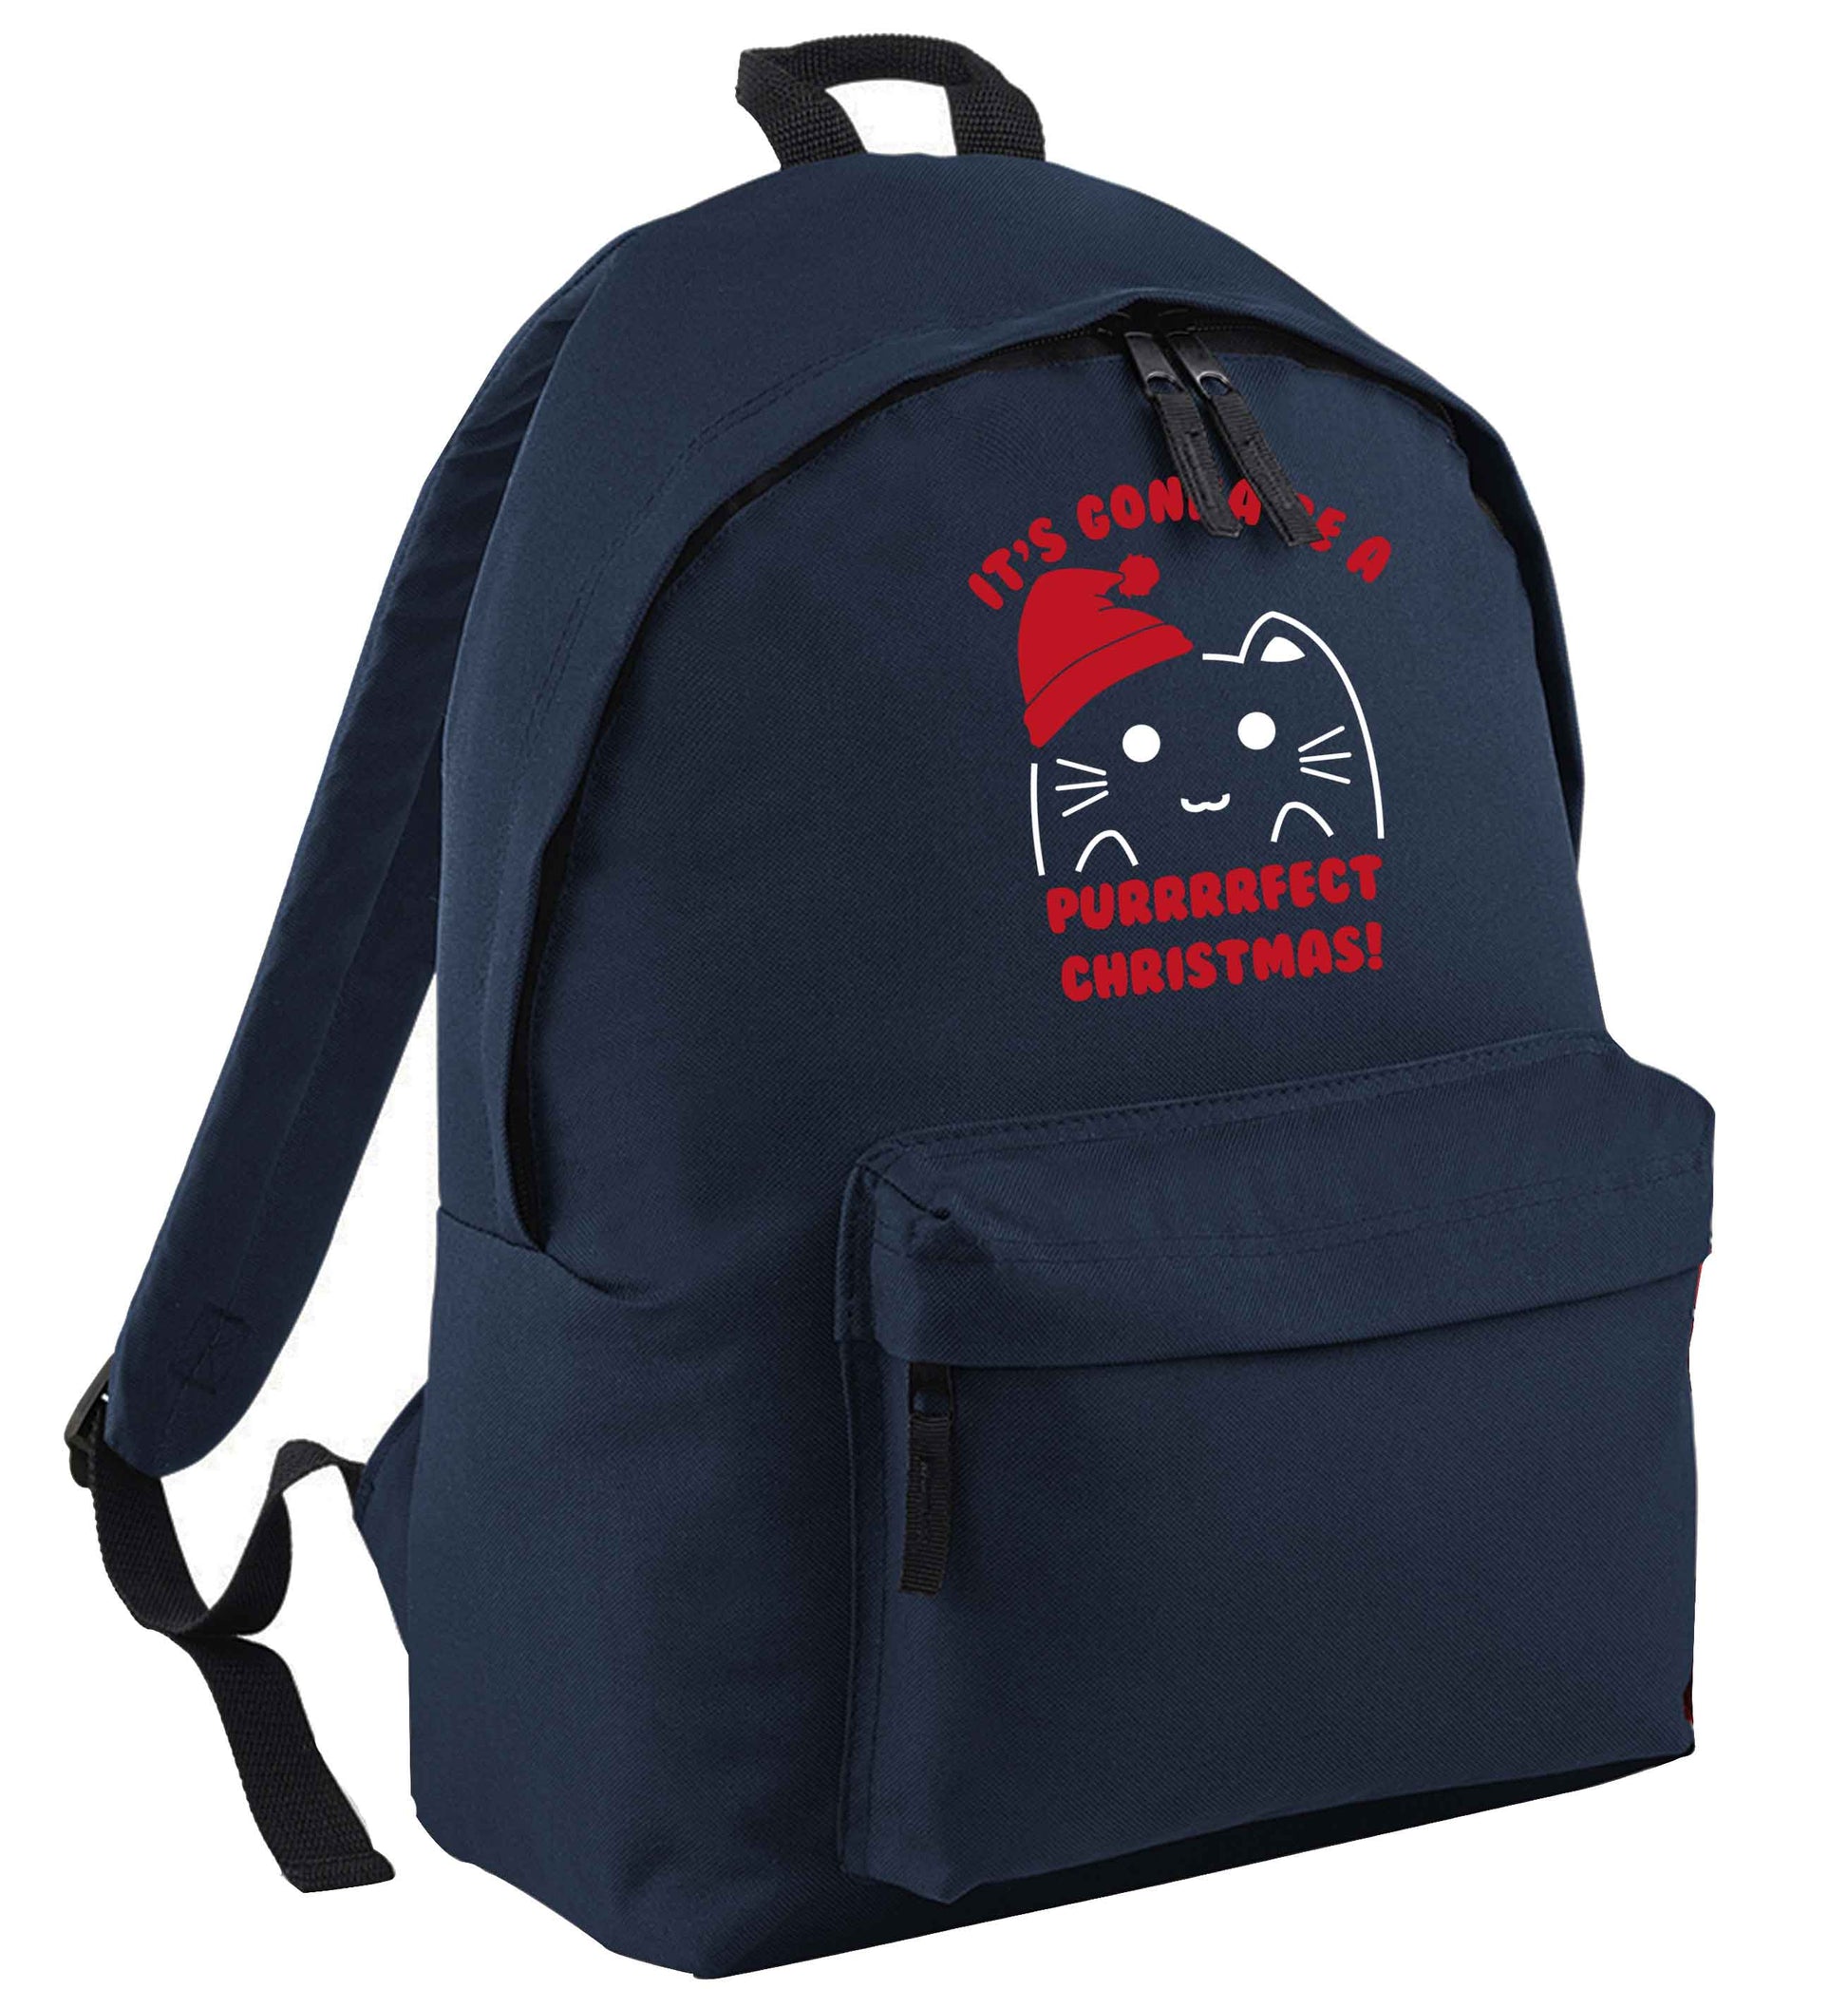 It's going to be a purrfect Christmas navy adults backpack